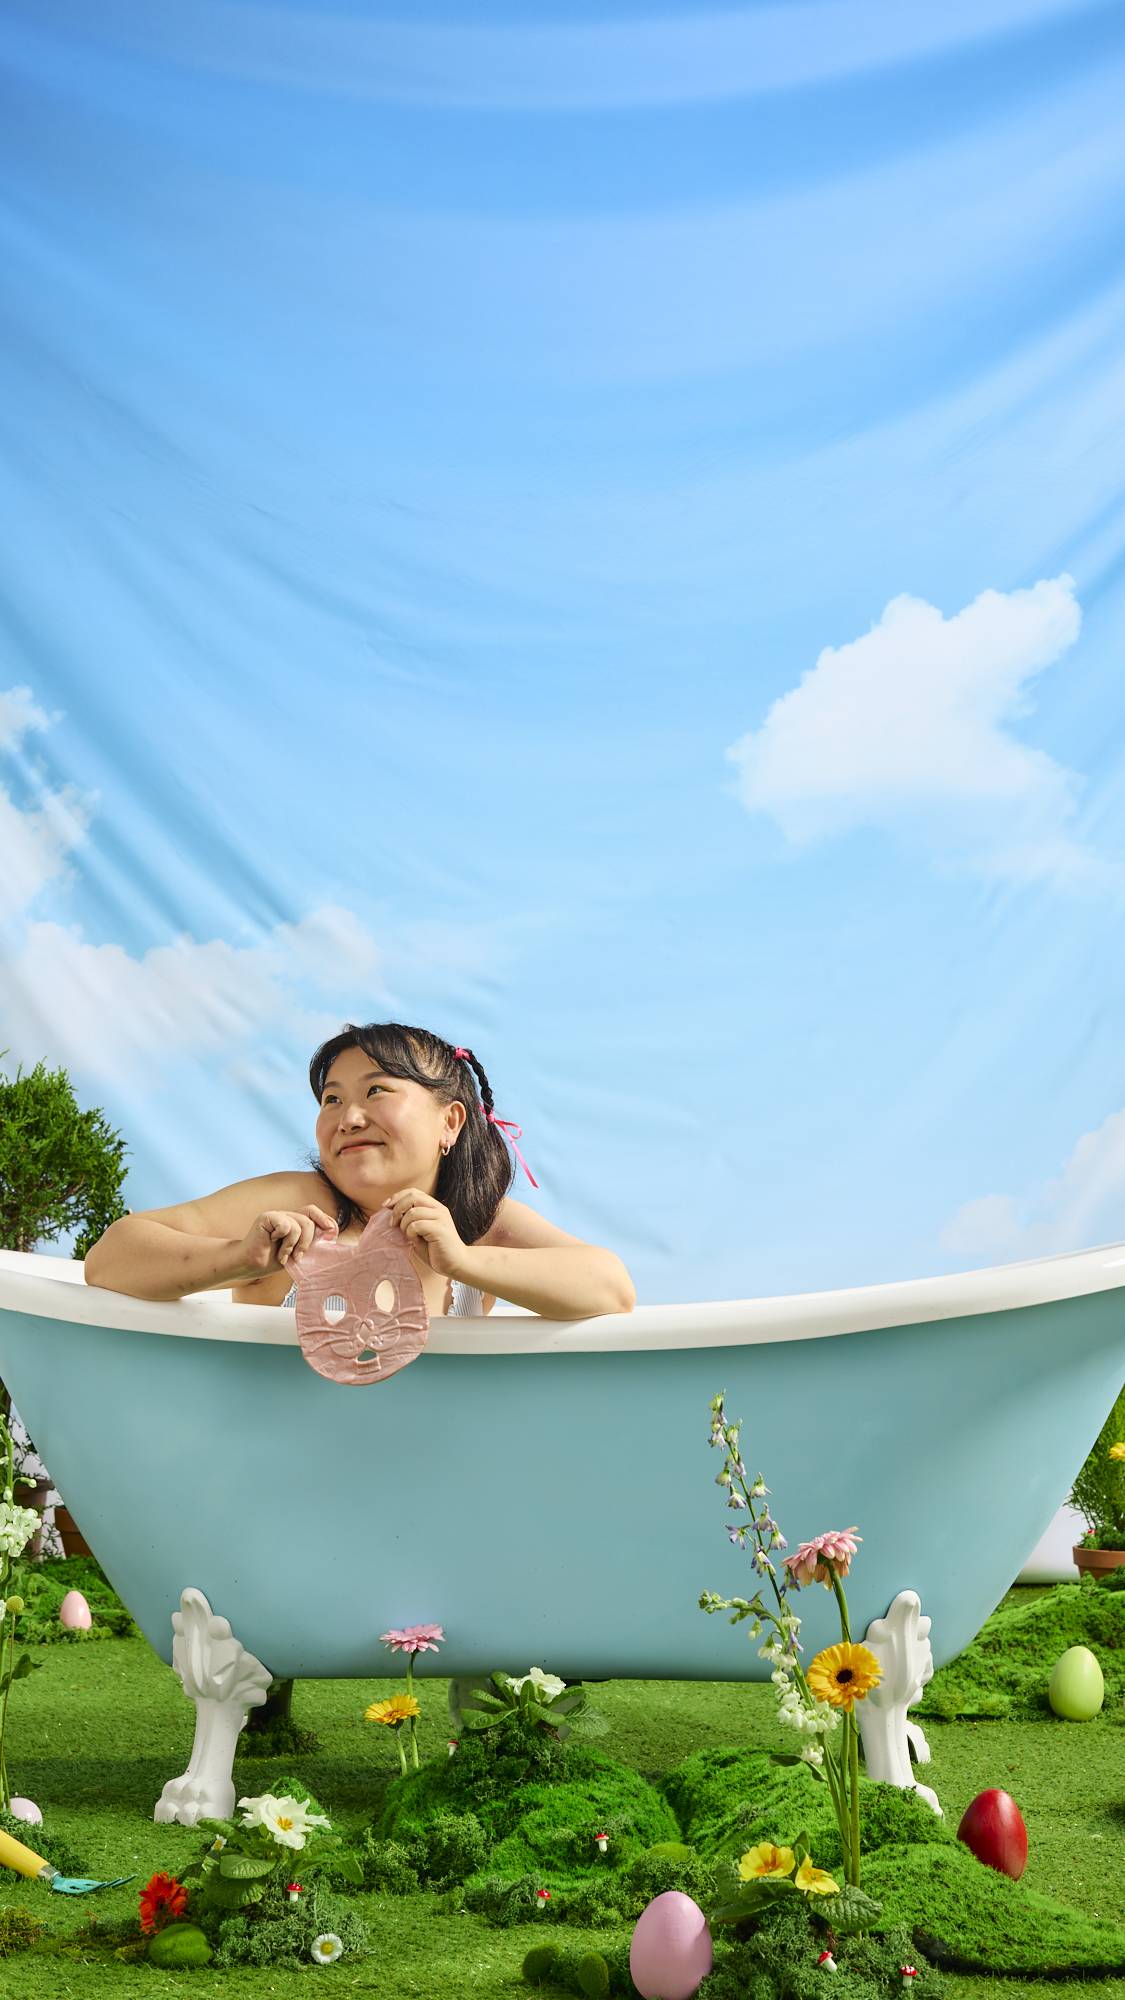 The model is sat in the outdoor, roll-top bath under blue skies as they hold the shimmery Bunny face mask. Grass and fresh spring flowers cover the floor. 